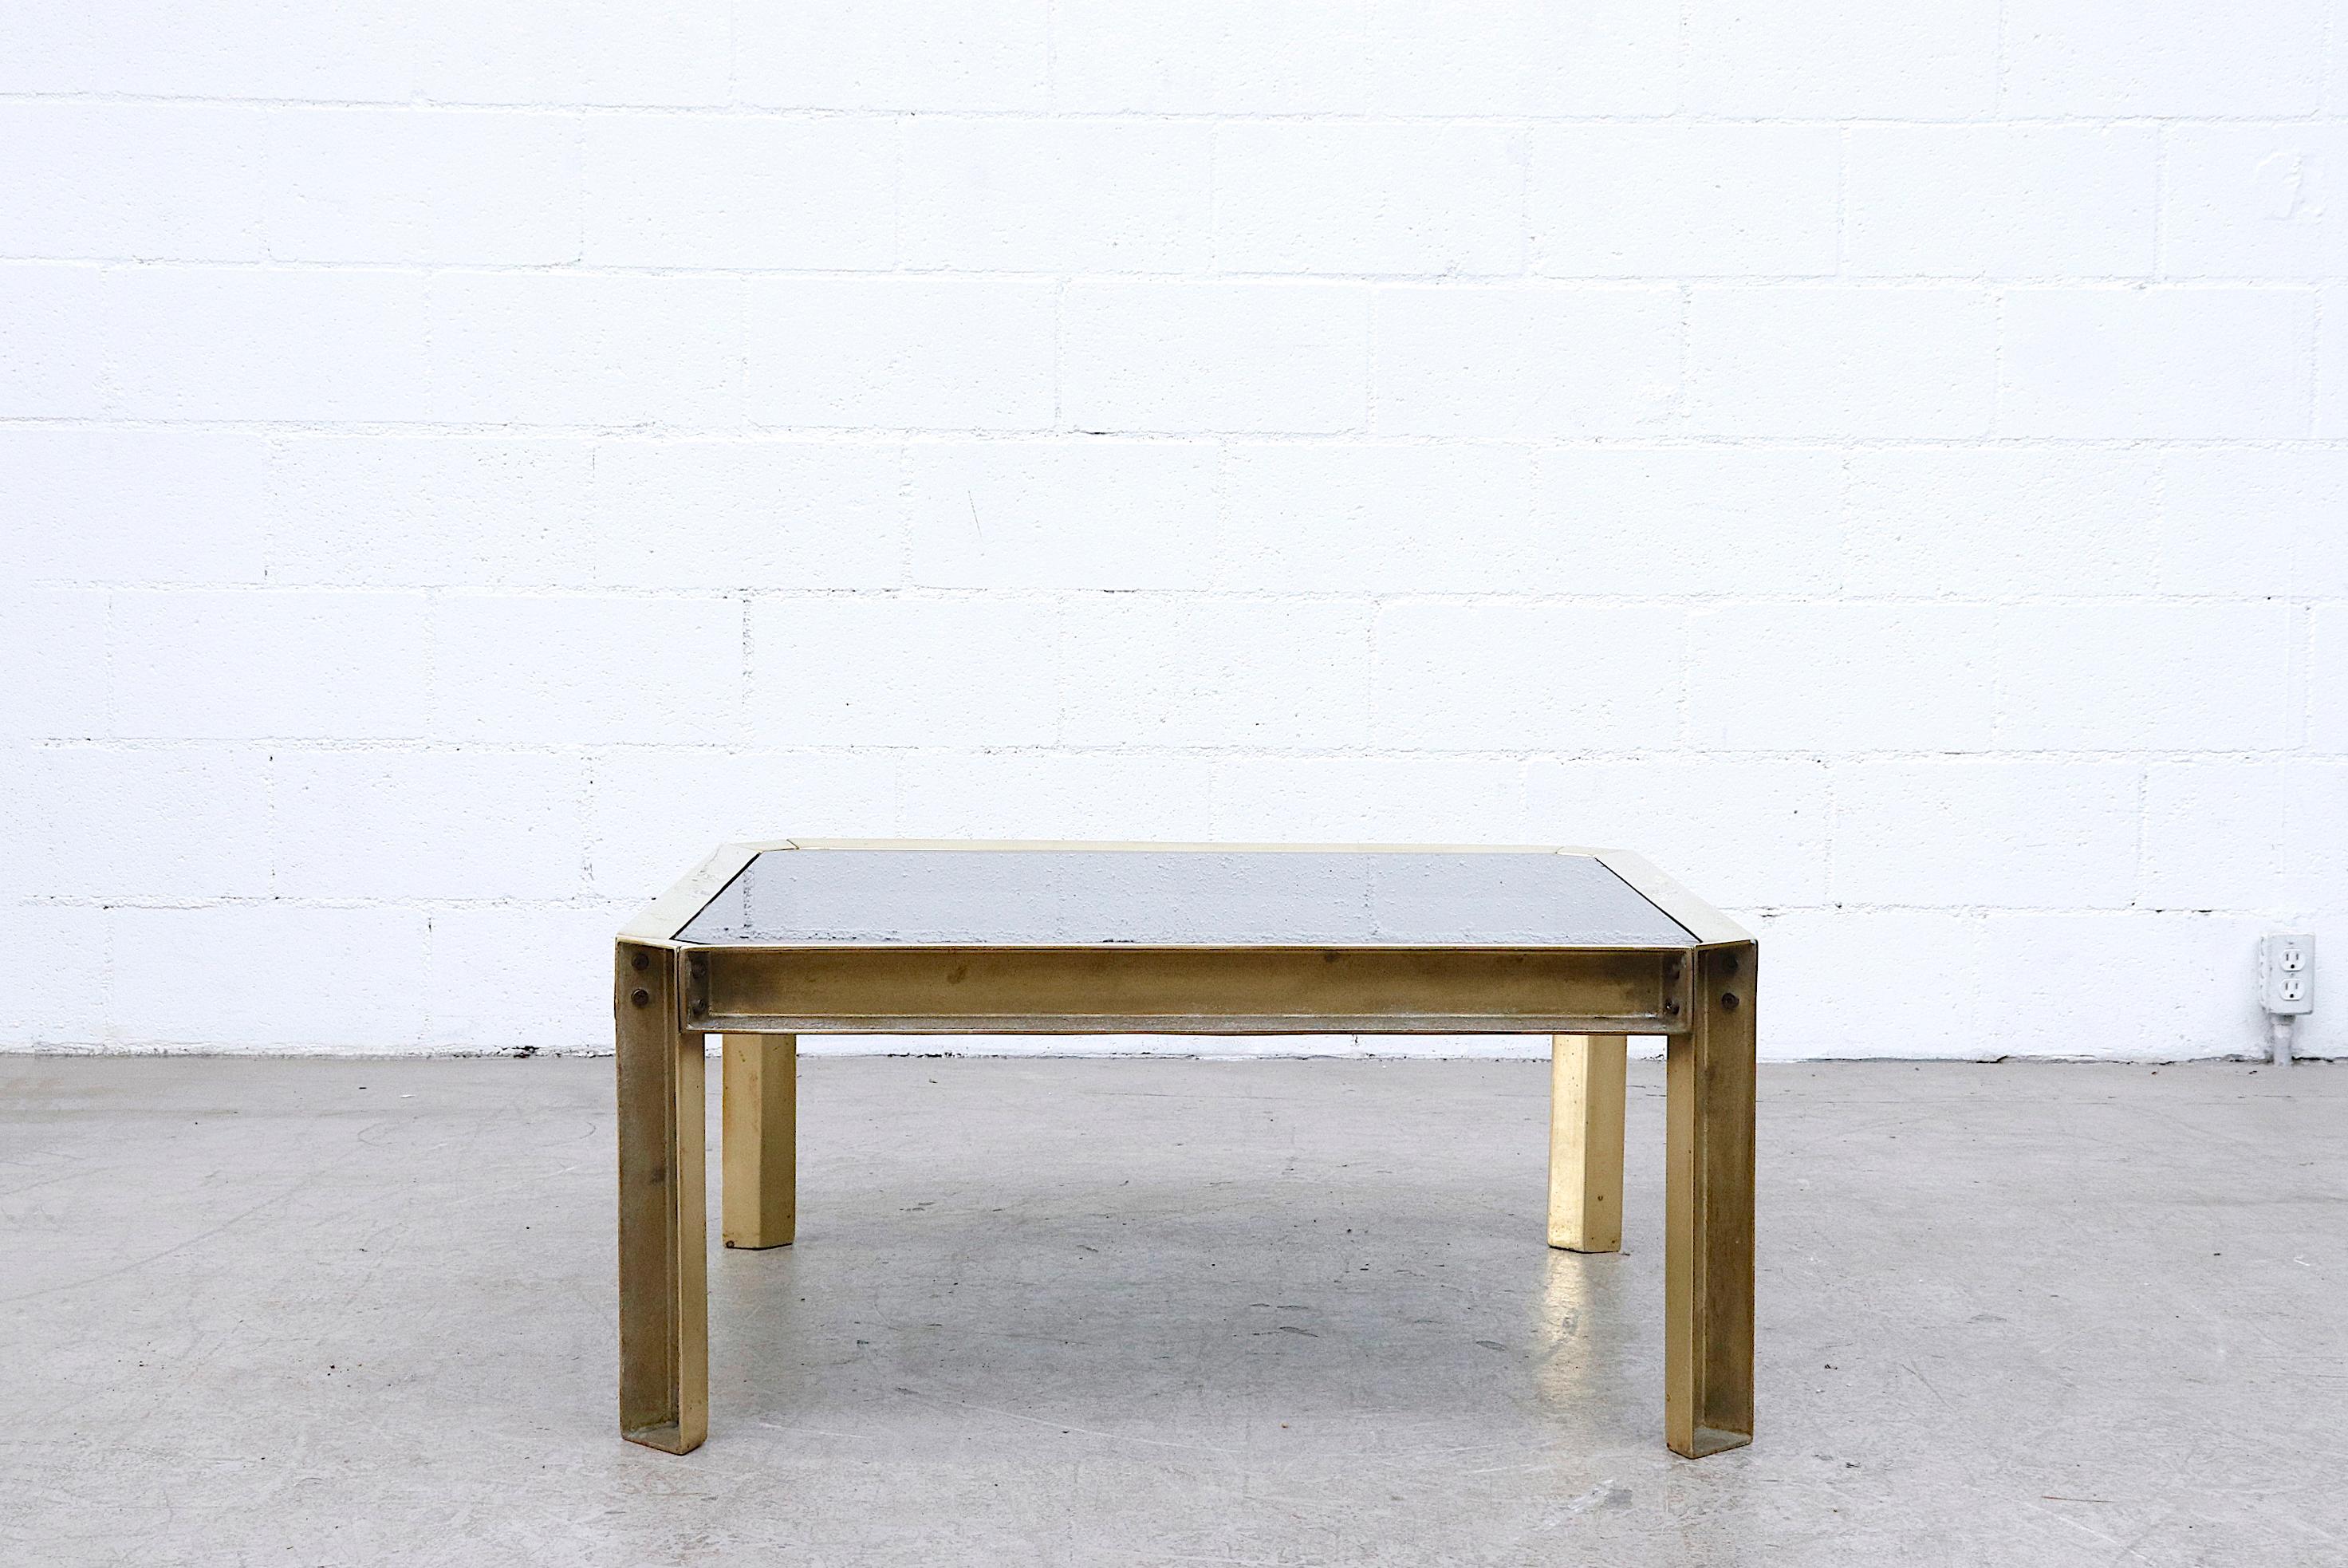 Midcentury Industrial brass frame and smoked glass coffee table with raw construction appearance. In original condition with some visible wear, small chips to the glass and nice patina. Peter Ghyczy studied architecture with an industrial design